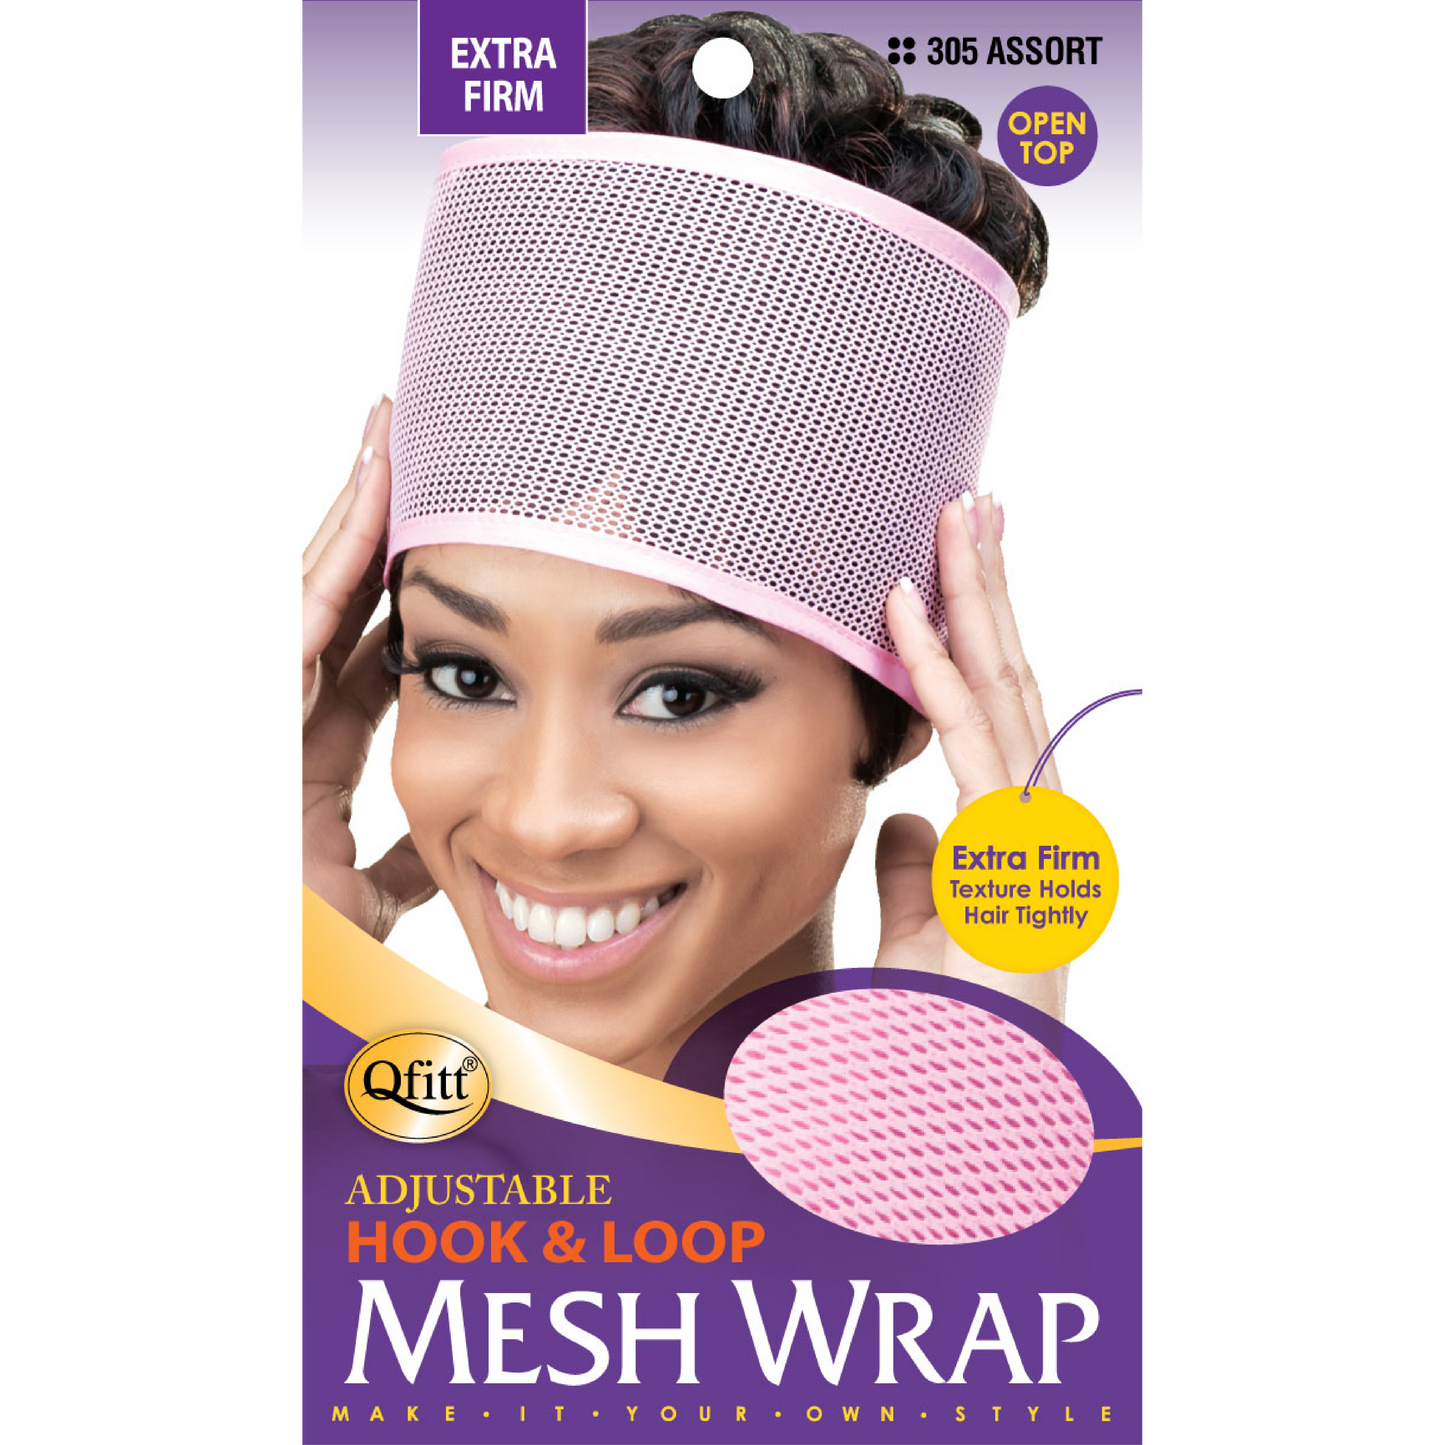 EXTRA FIRM MESH WRAP